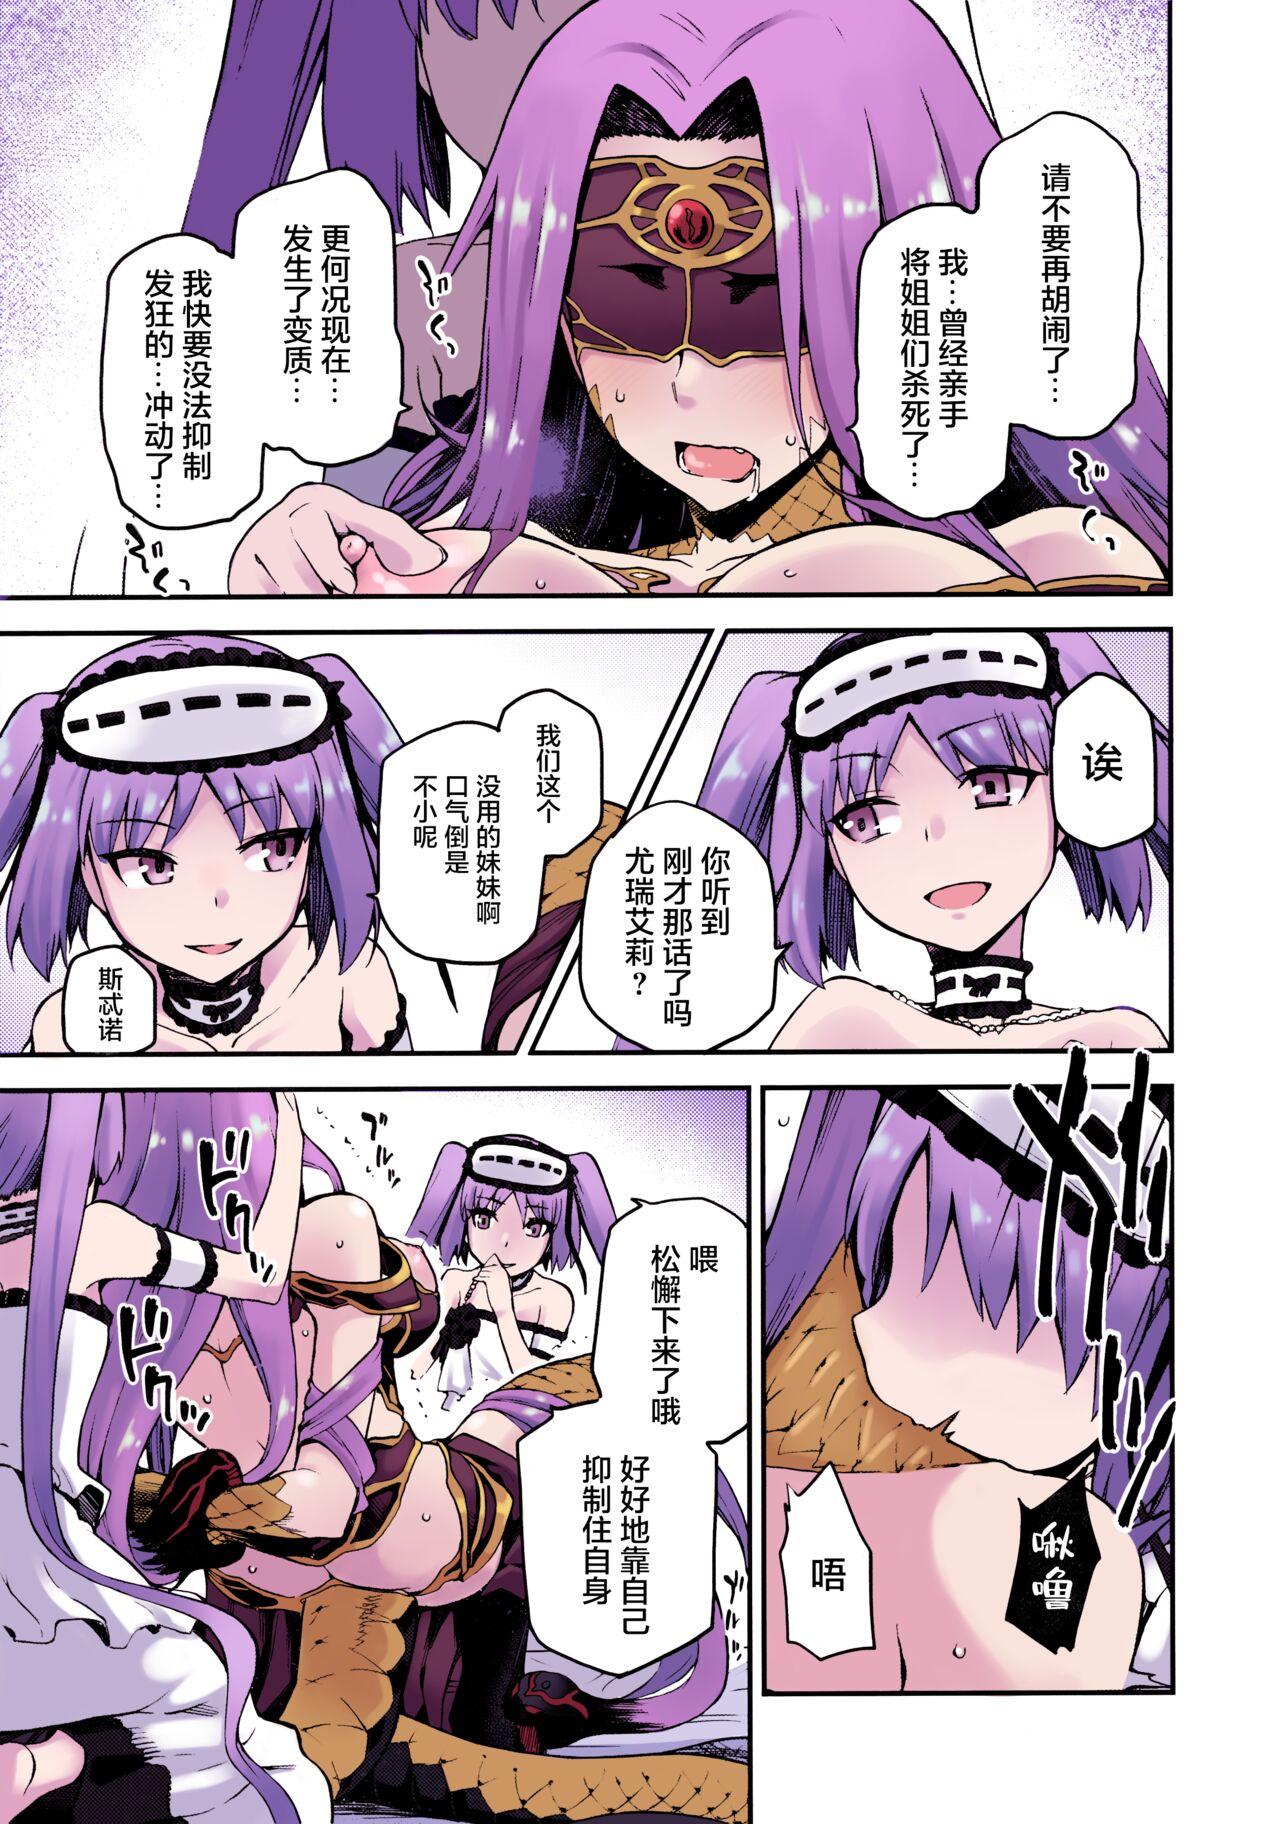 Furry Hebigami no Honnou - Fate grand order Mulher - Page 6